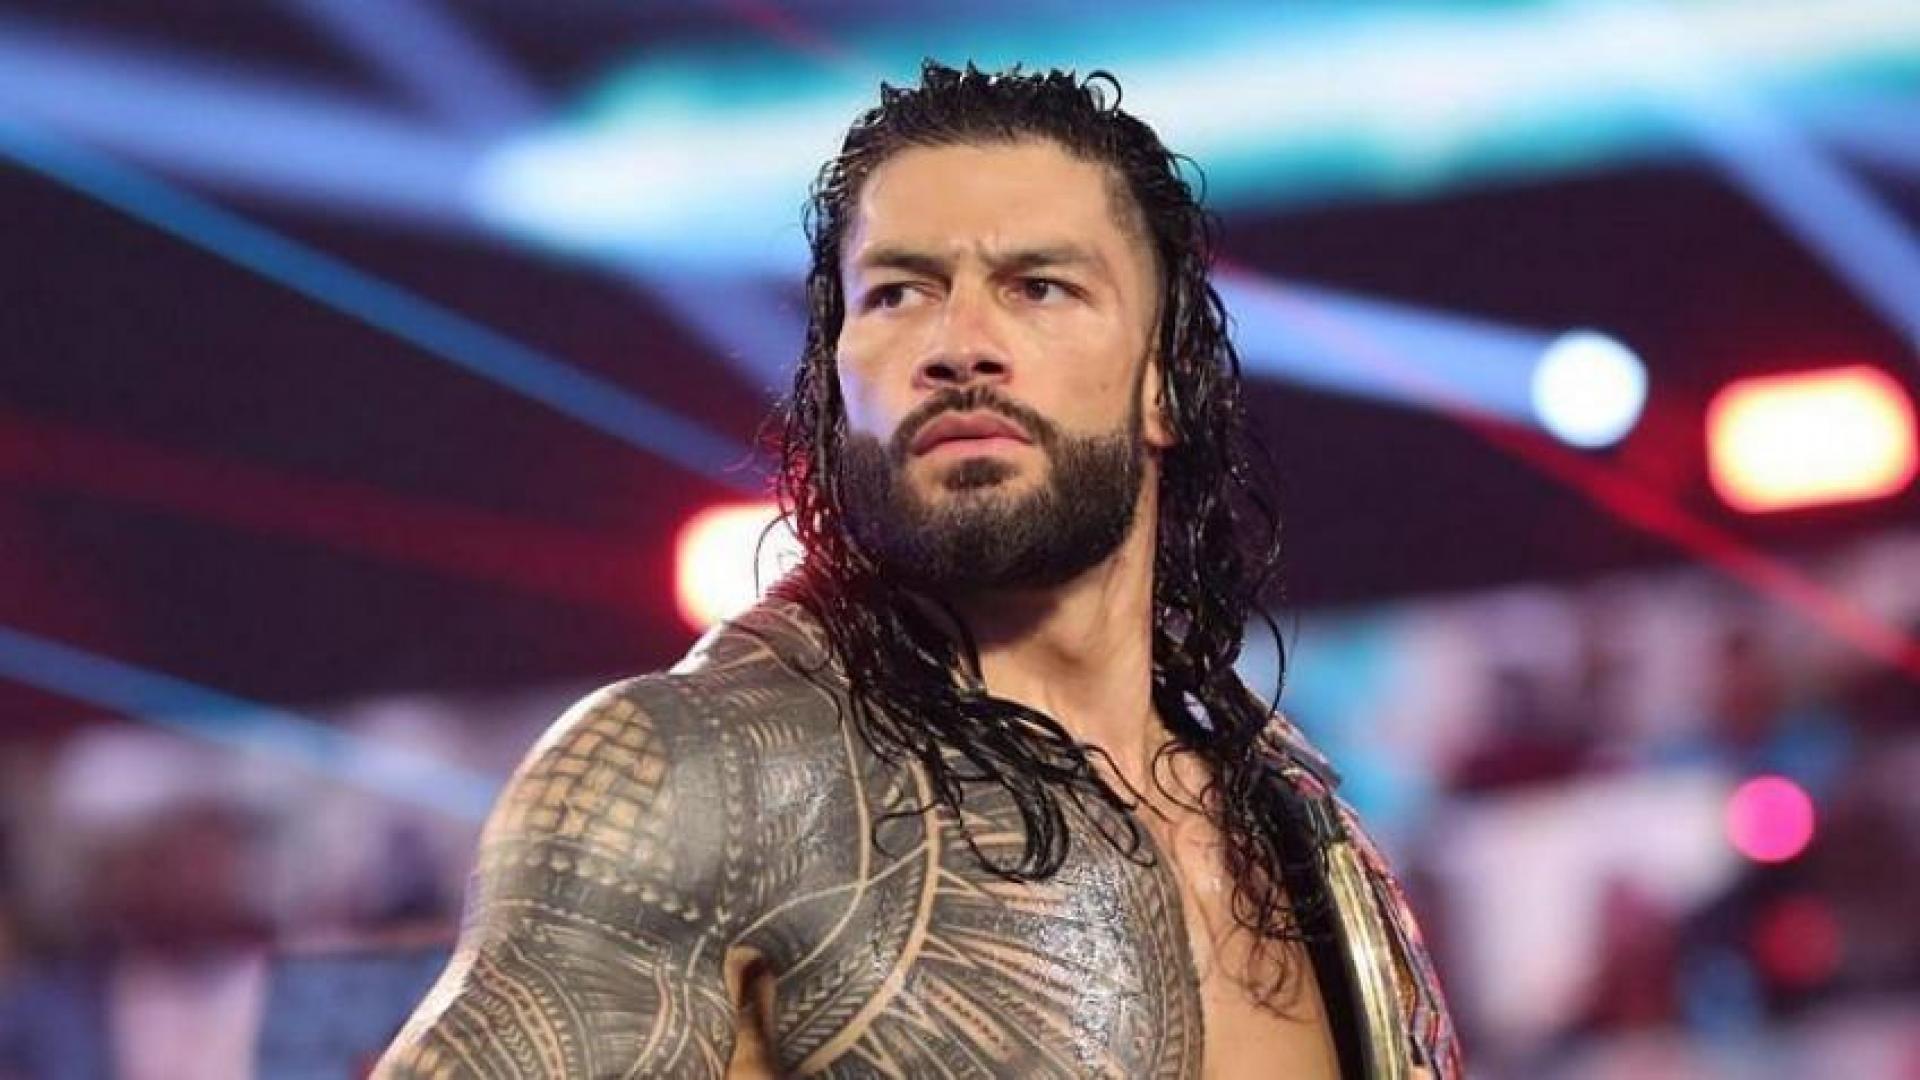 5 WWE Superstars who could realistically pin Roman Reigns in 2021.